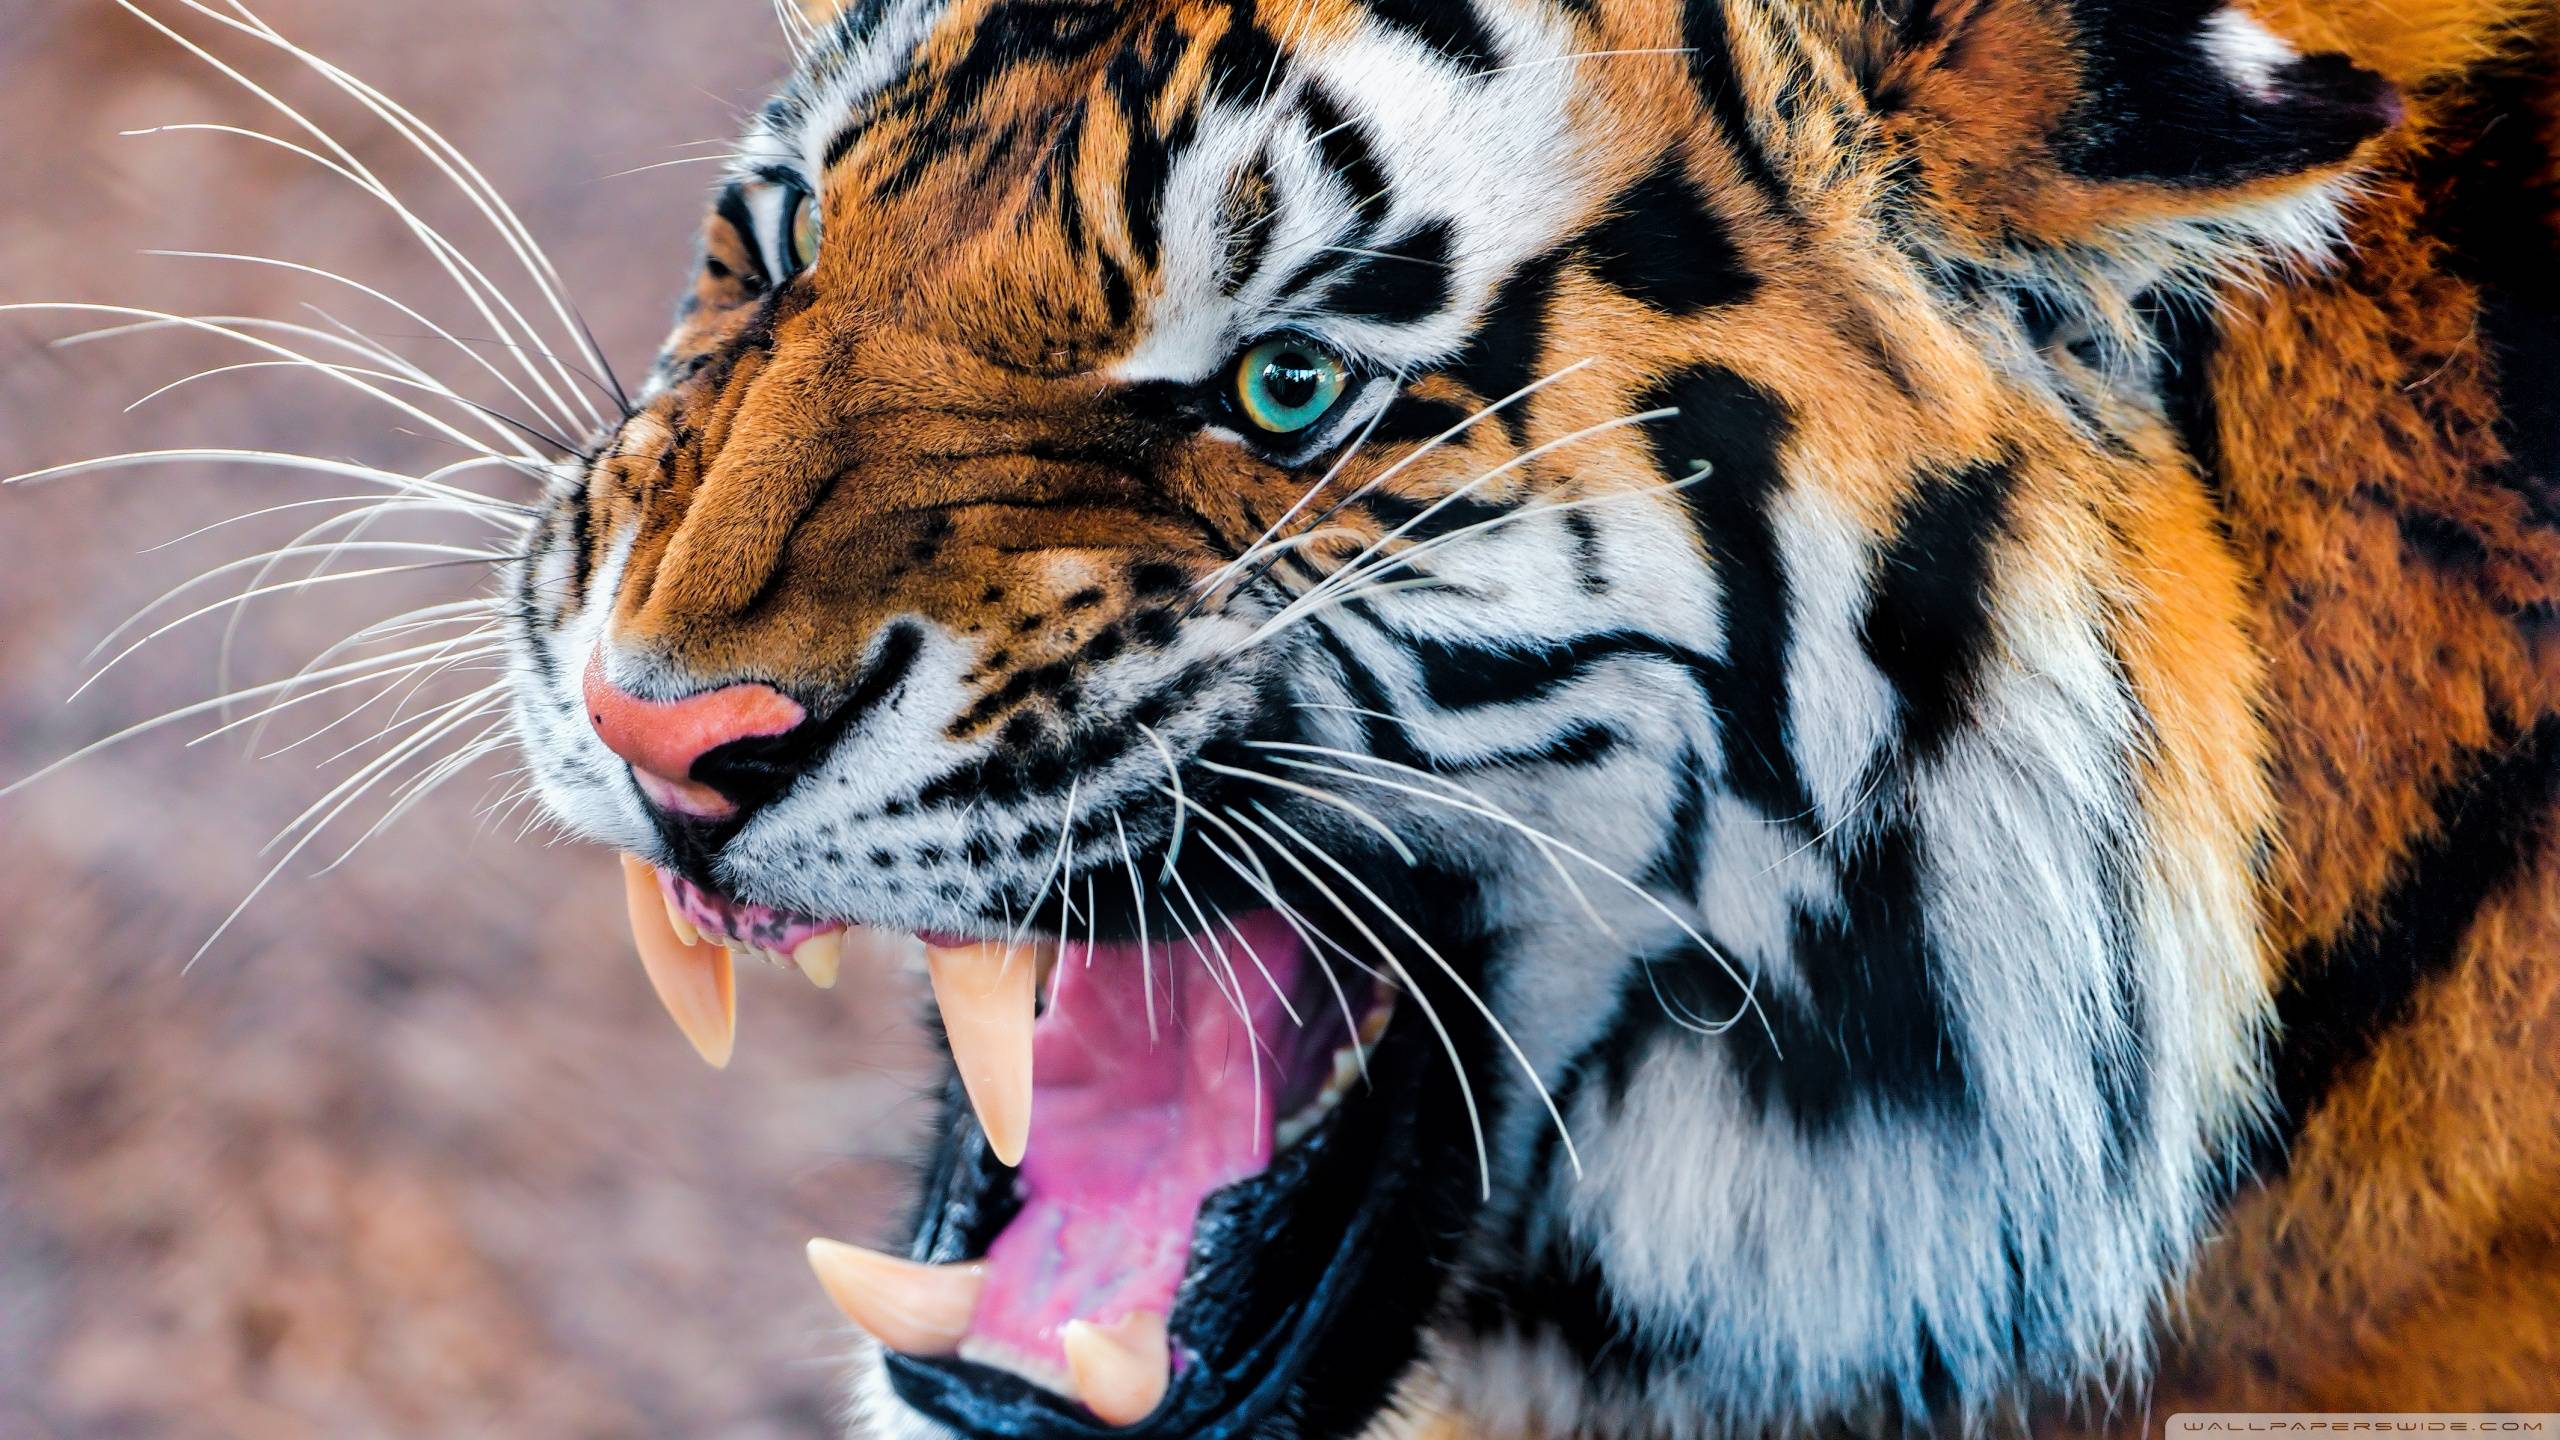 Wallpapers For – Angry Siberian Tiger Wallpapers